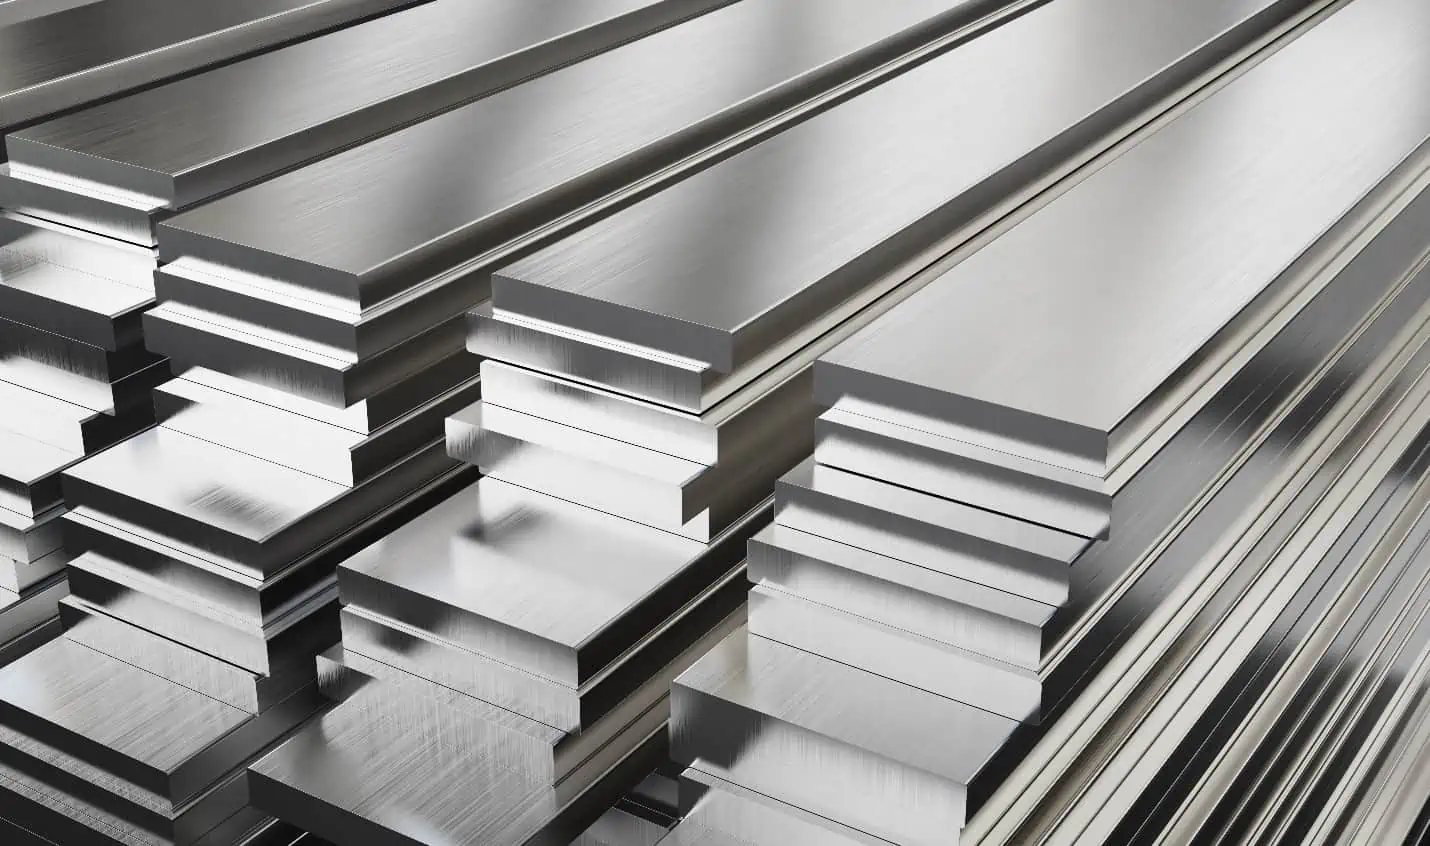 Magnetic Properties of Stainless Steel